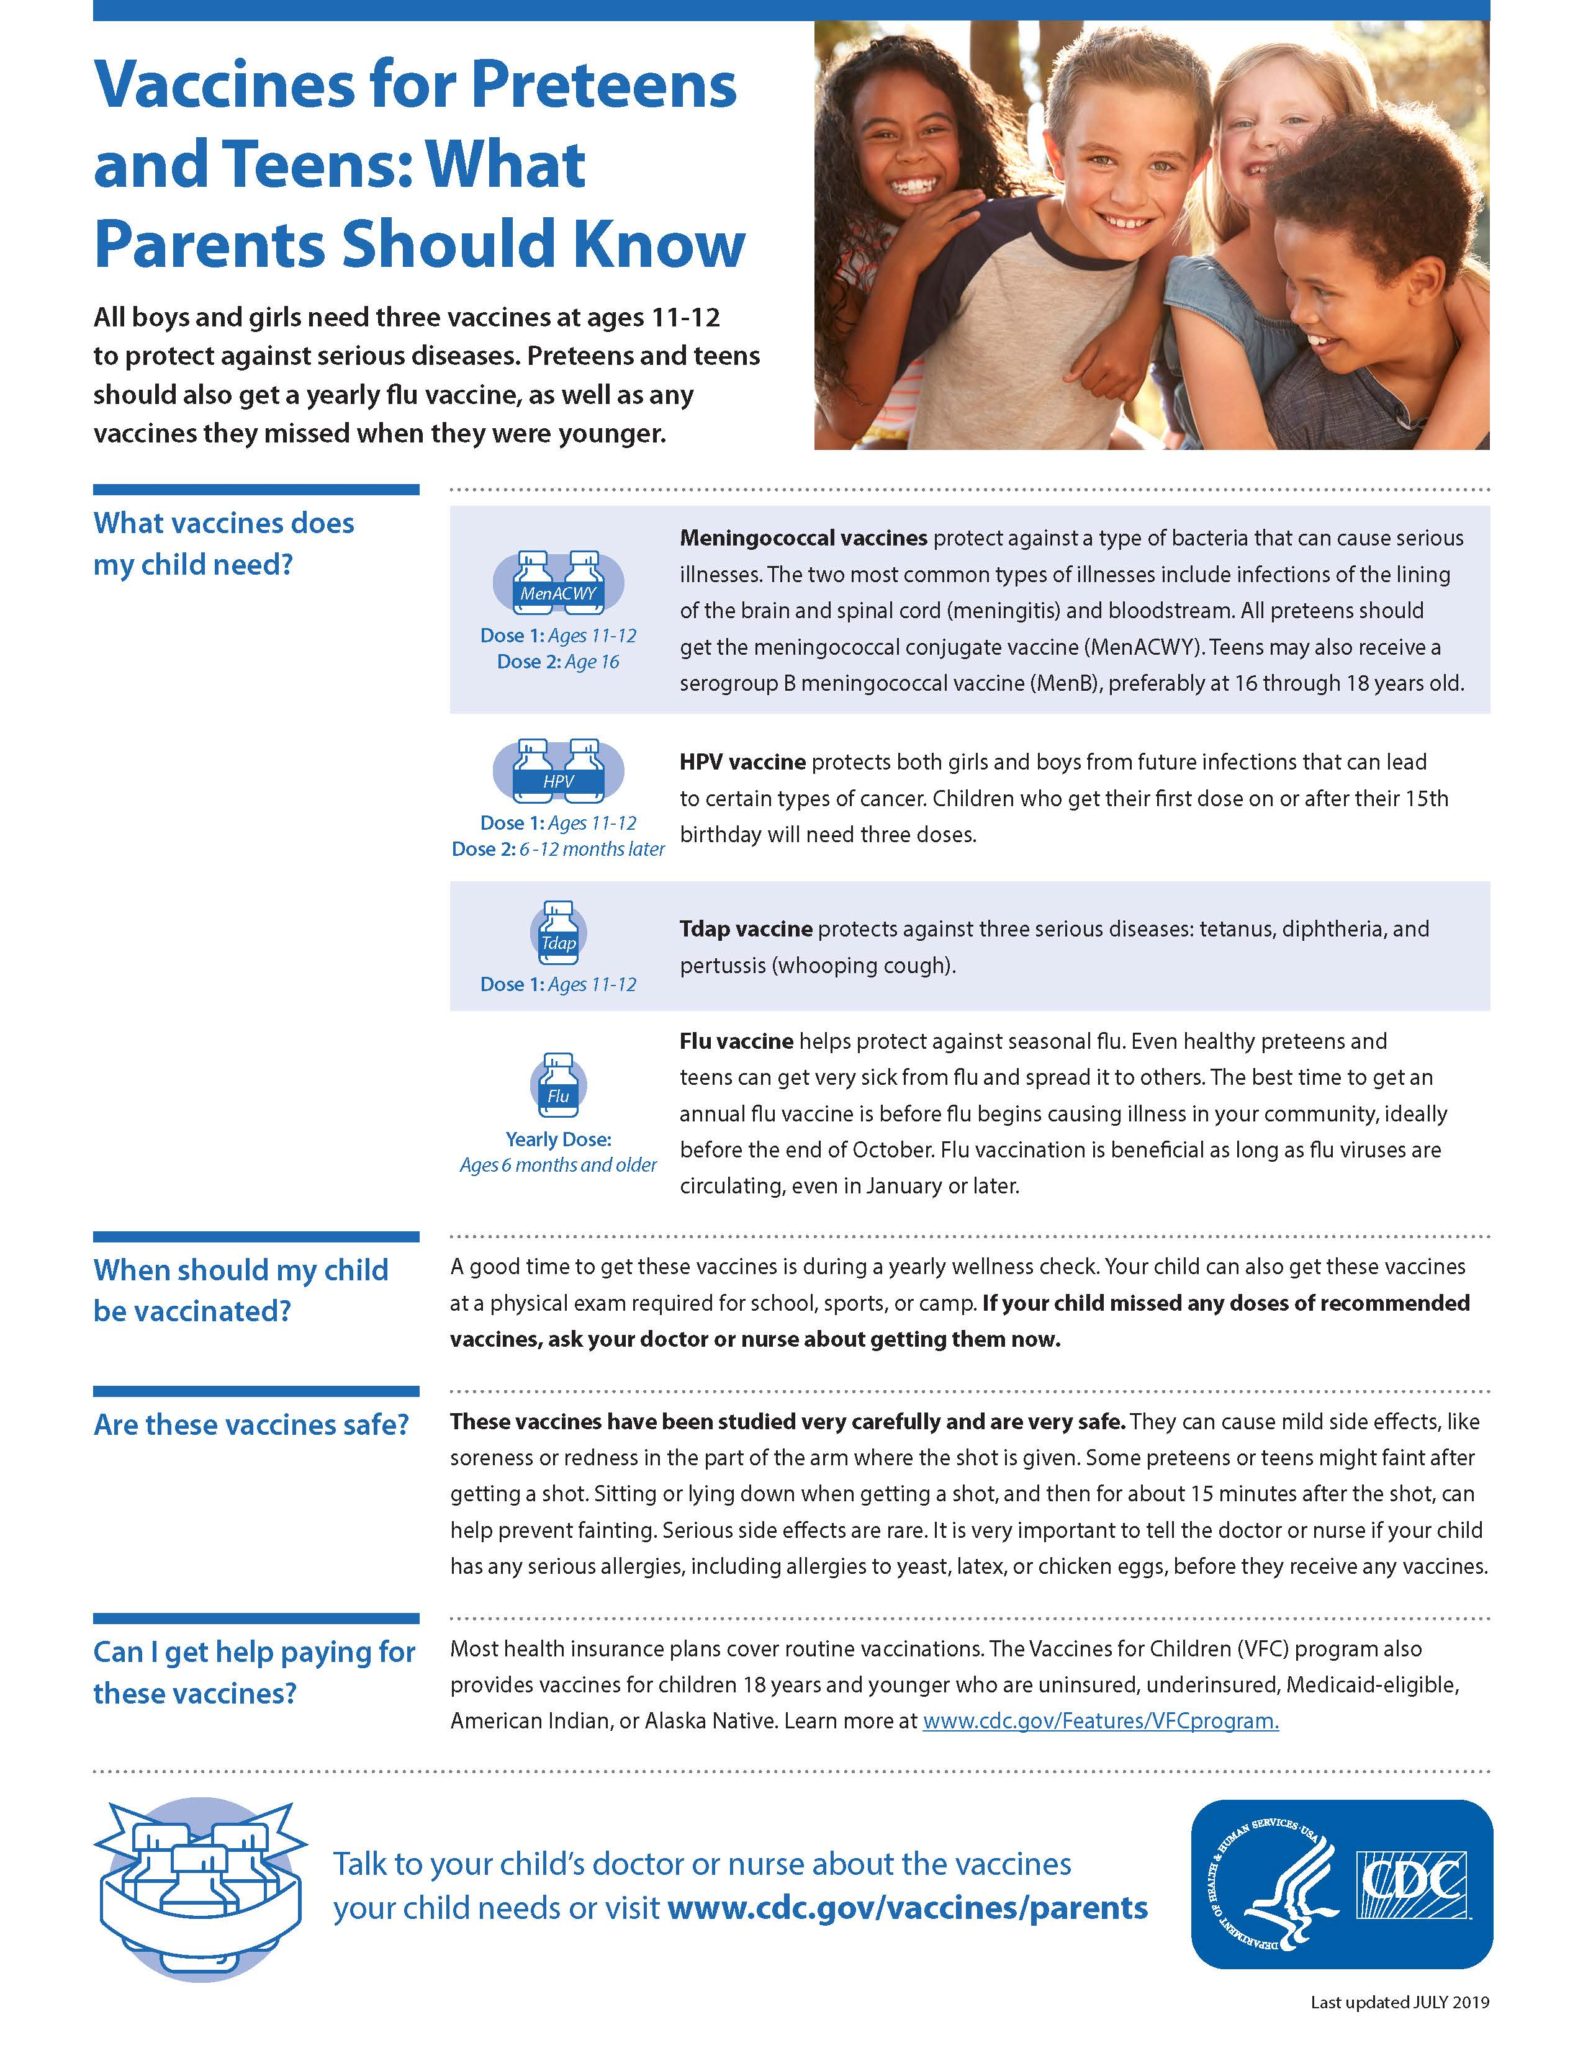 Vaccines for Preteens and Teens: What Parents Should Know | CDC